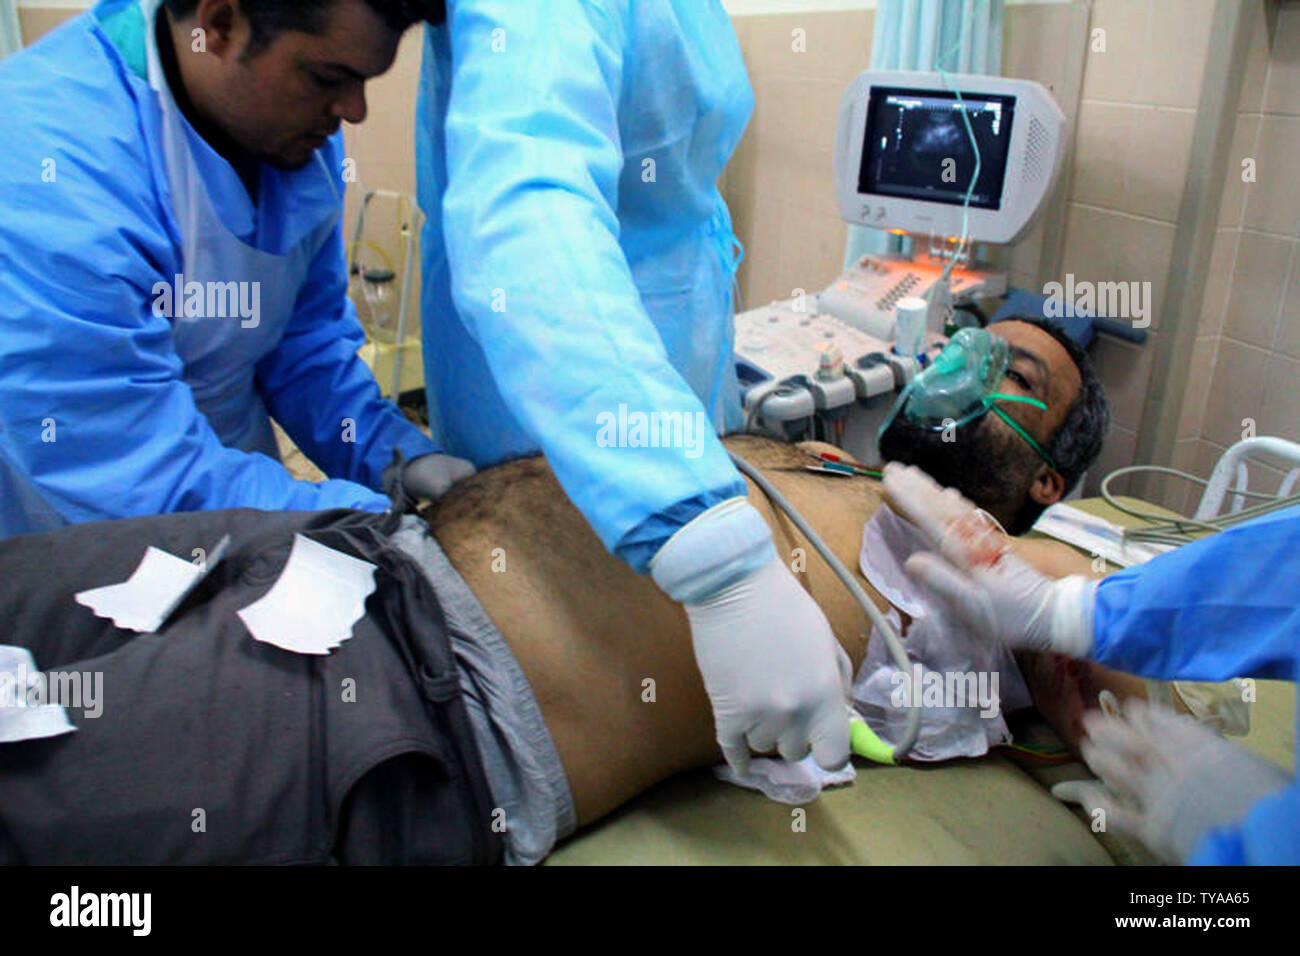 Medics treat a wounded person at a hospital in Benghazi, Libya, on February 25, 2011. Euphoria in Libya's second city Benghazi gave way to growing concern that it remains vulnerable to a counter-attack by Gaddafi's forces.   UPI Stock Photo